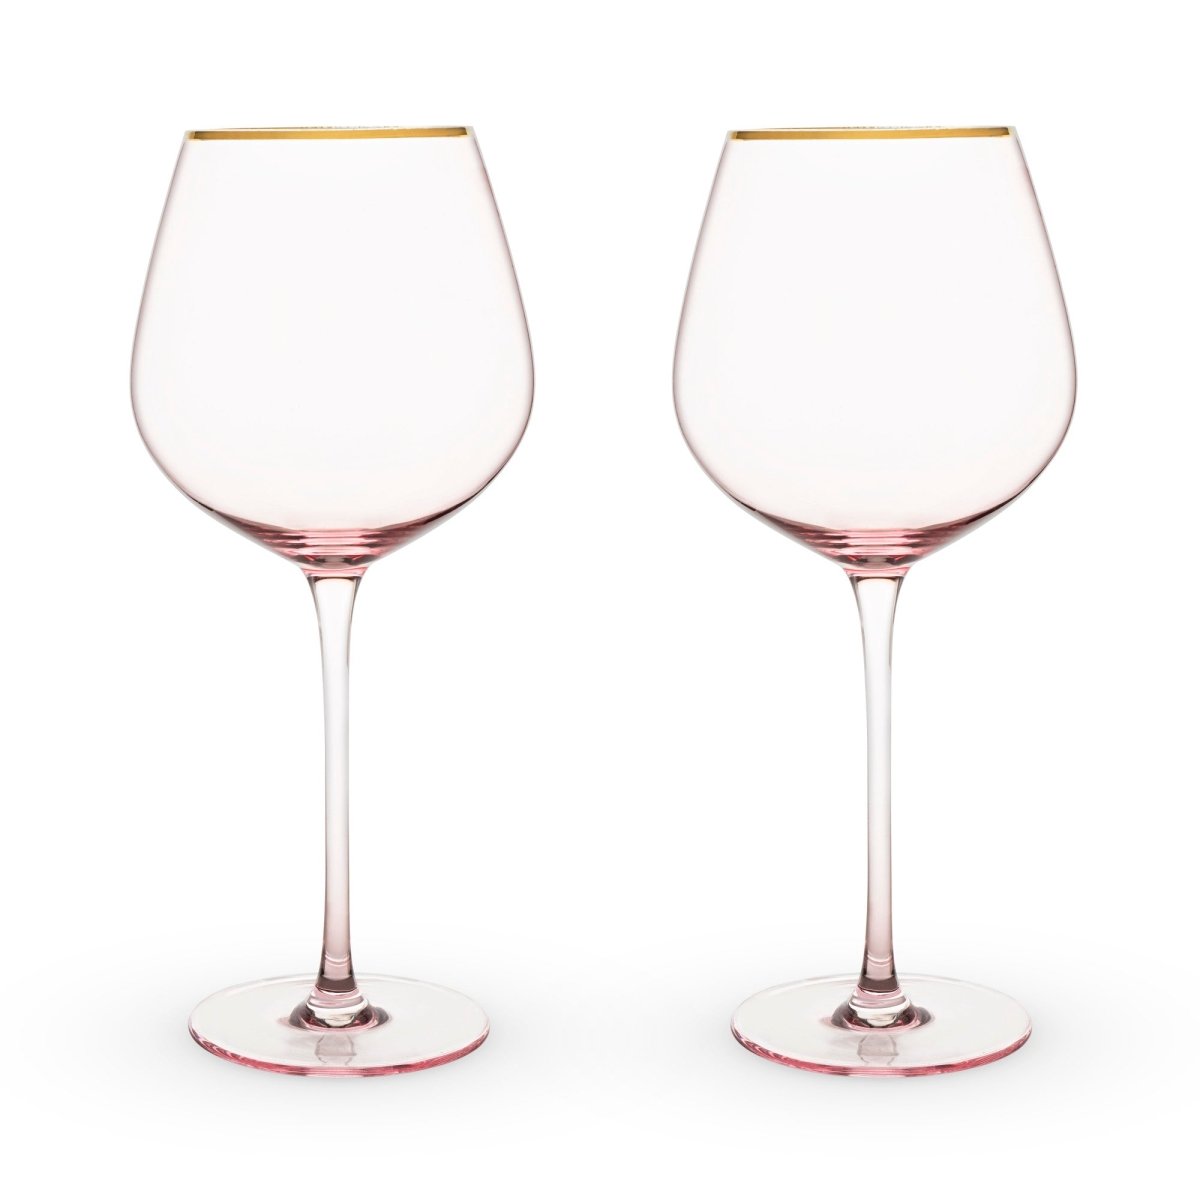 Twine Rose Crystal Red Wine Glass, Set of 2 - lily & onyx